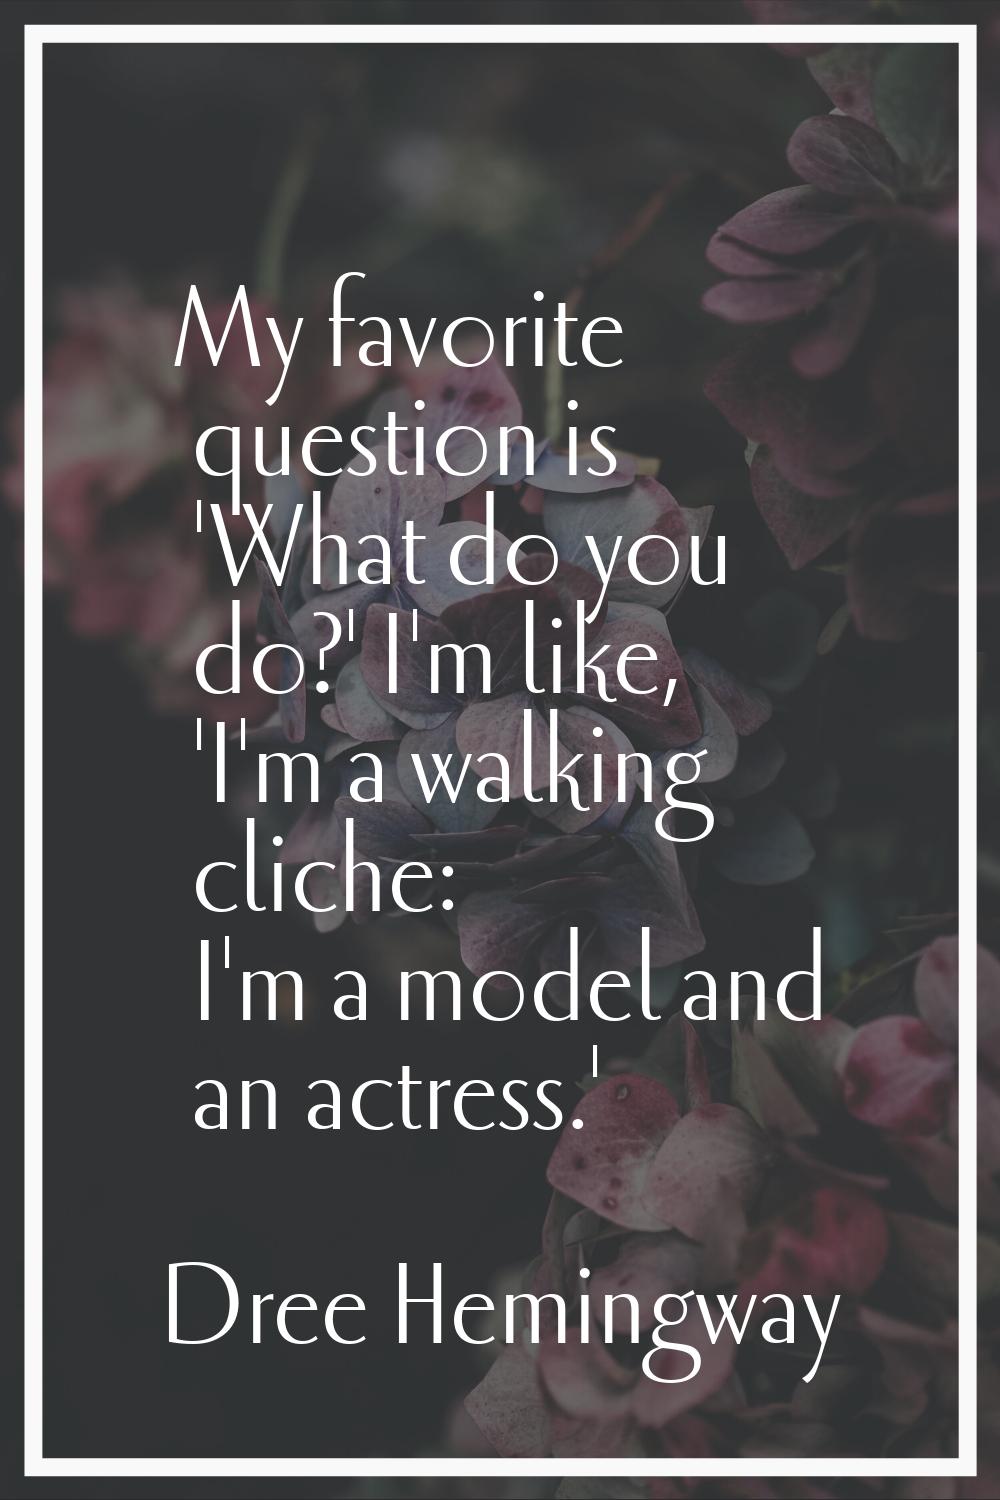 My favorite question is 'What do you do?' I'm like, 'I'm a walking cliche: I'm a model and an actre